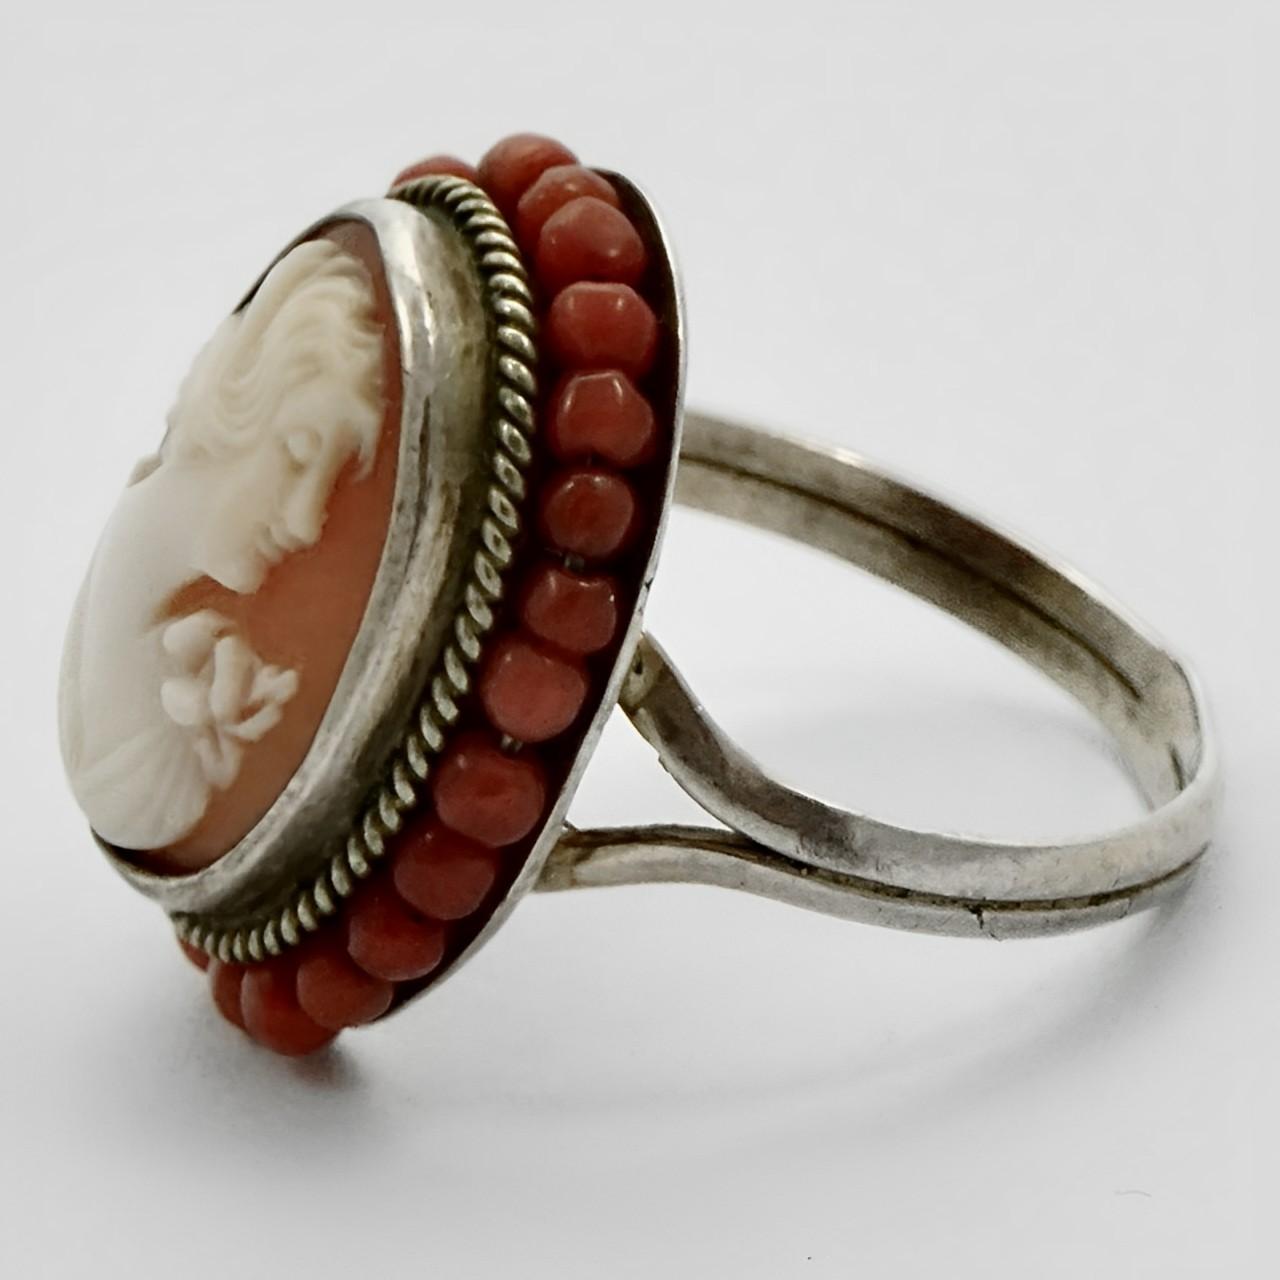 Beautiful 800 silver and shell cameo ring, with rope twist detail and a coral bead surround. Ring size UK N 1/2, US 6 3/4, and measuring diameter approximately 1.8 cm / .7 inch. There is scratching as expected. The ring was originally gold plated,